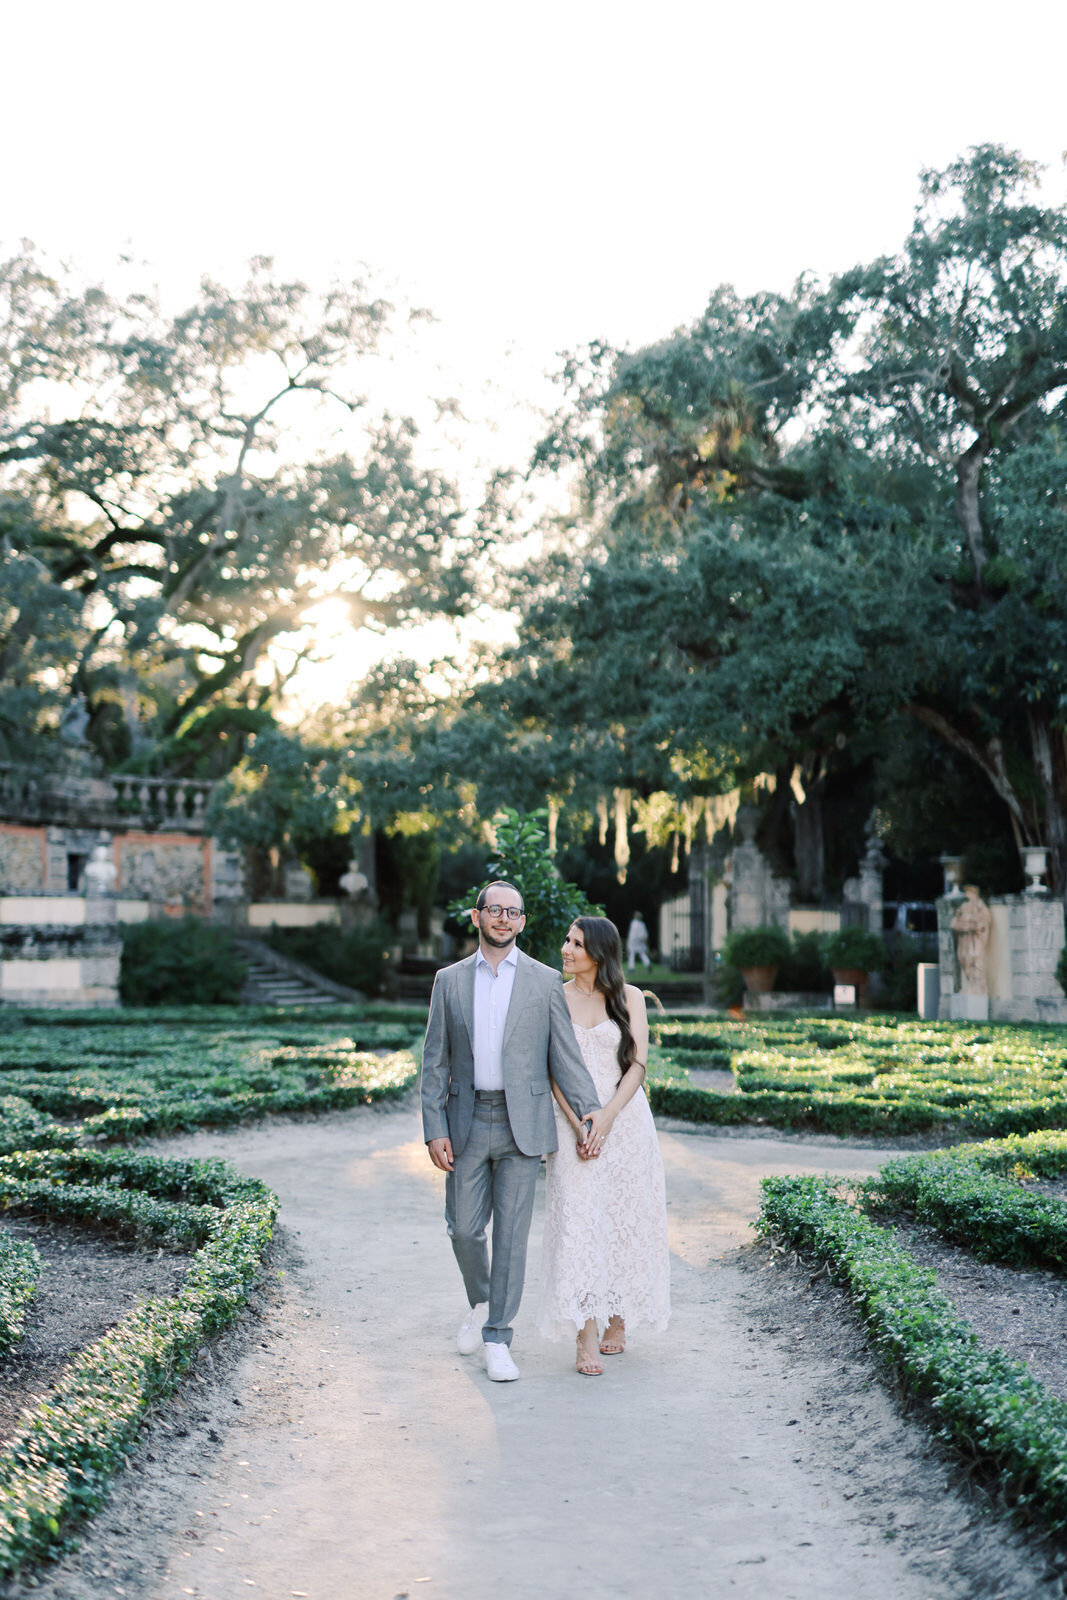 A Stylish and Chic Engagement Session at Vizcaya Museum in Miami Florida 29